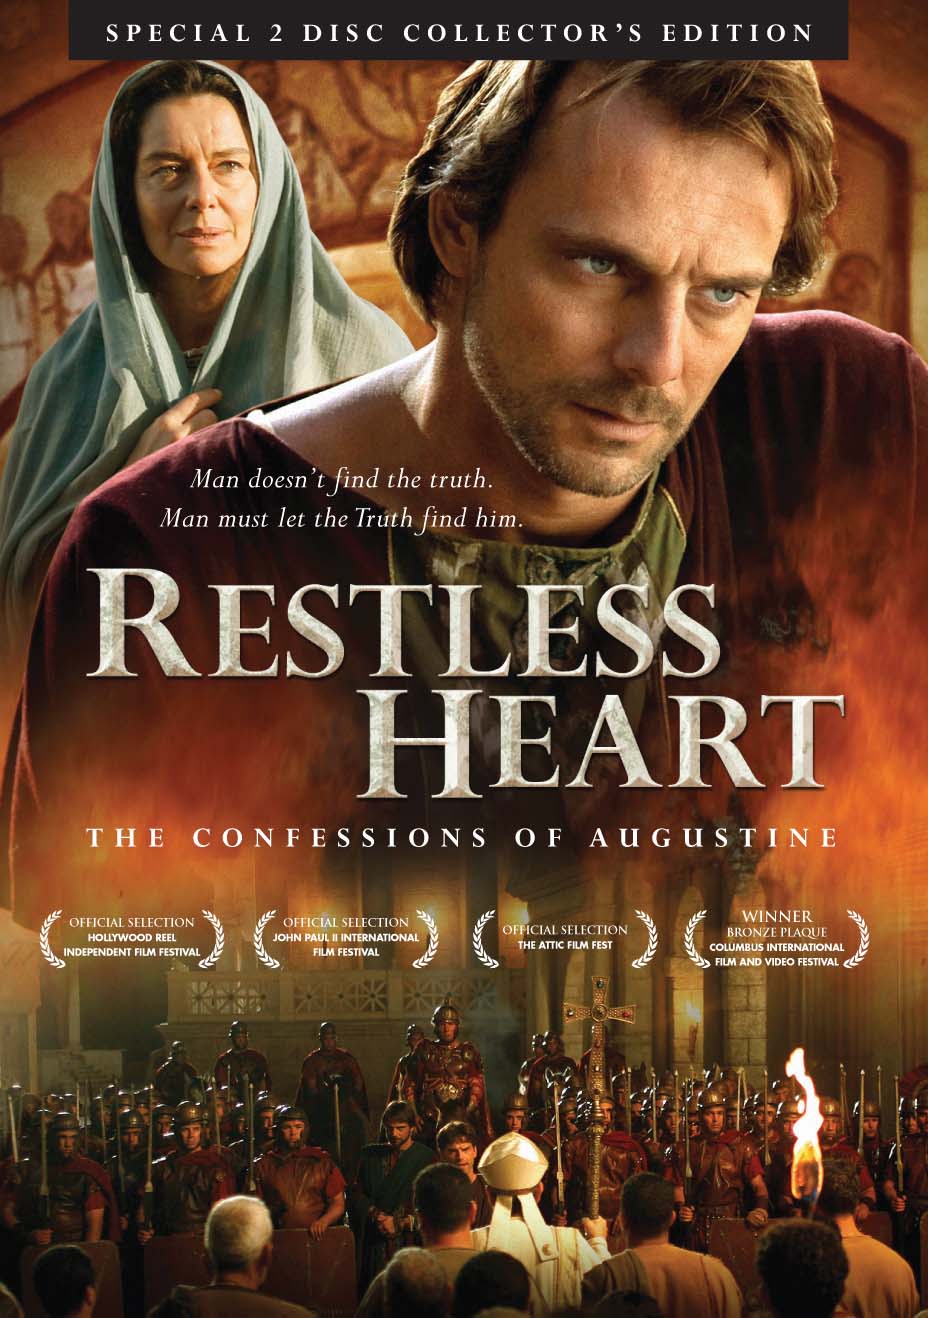 Restless Heart Confessions of St. Augustine DVD | Daily reflection